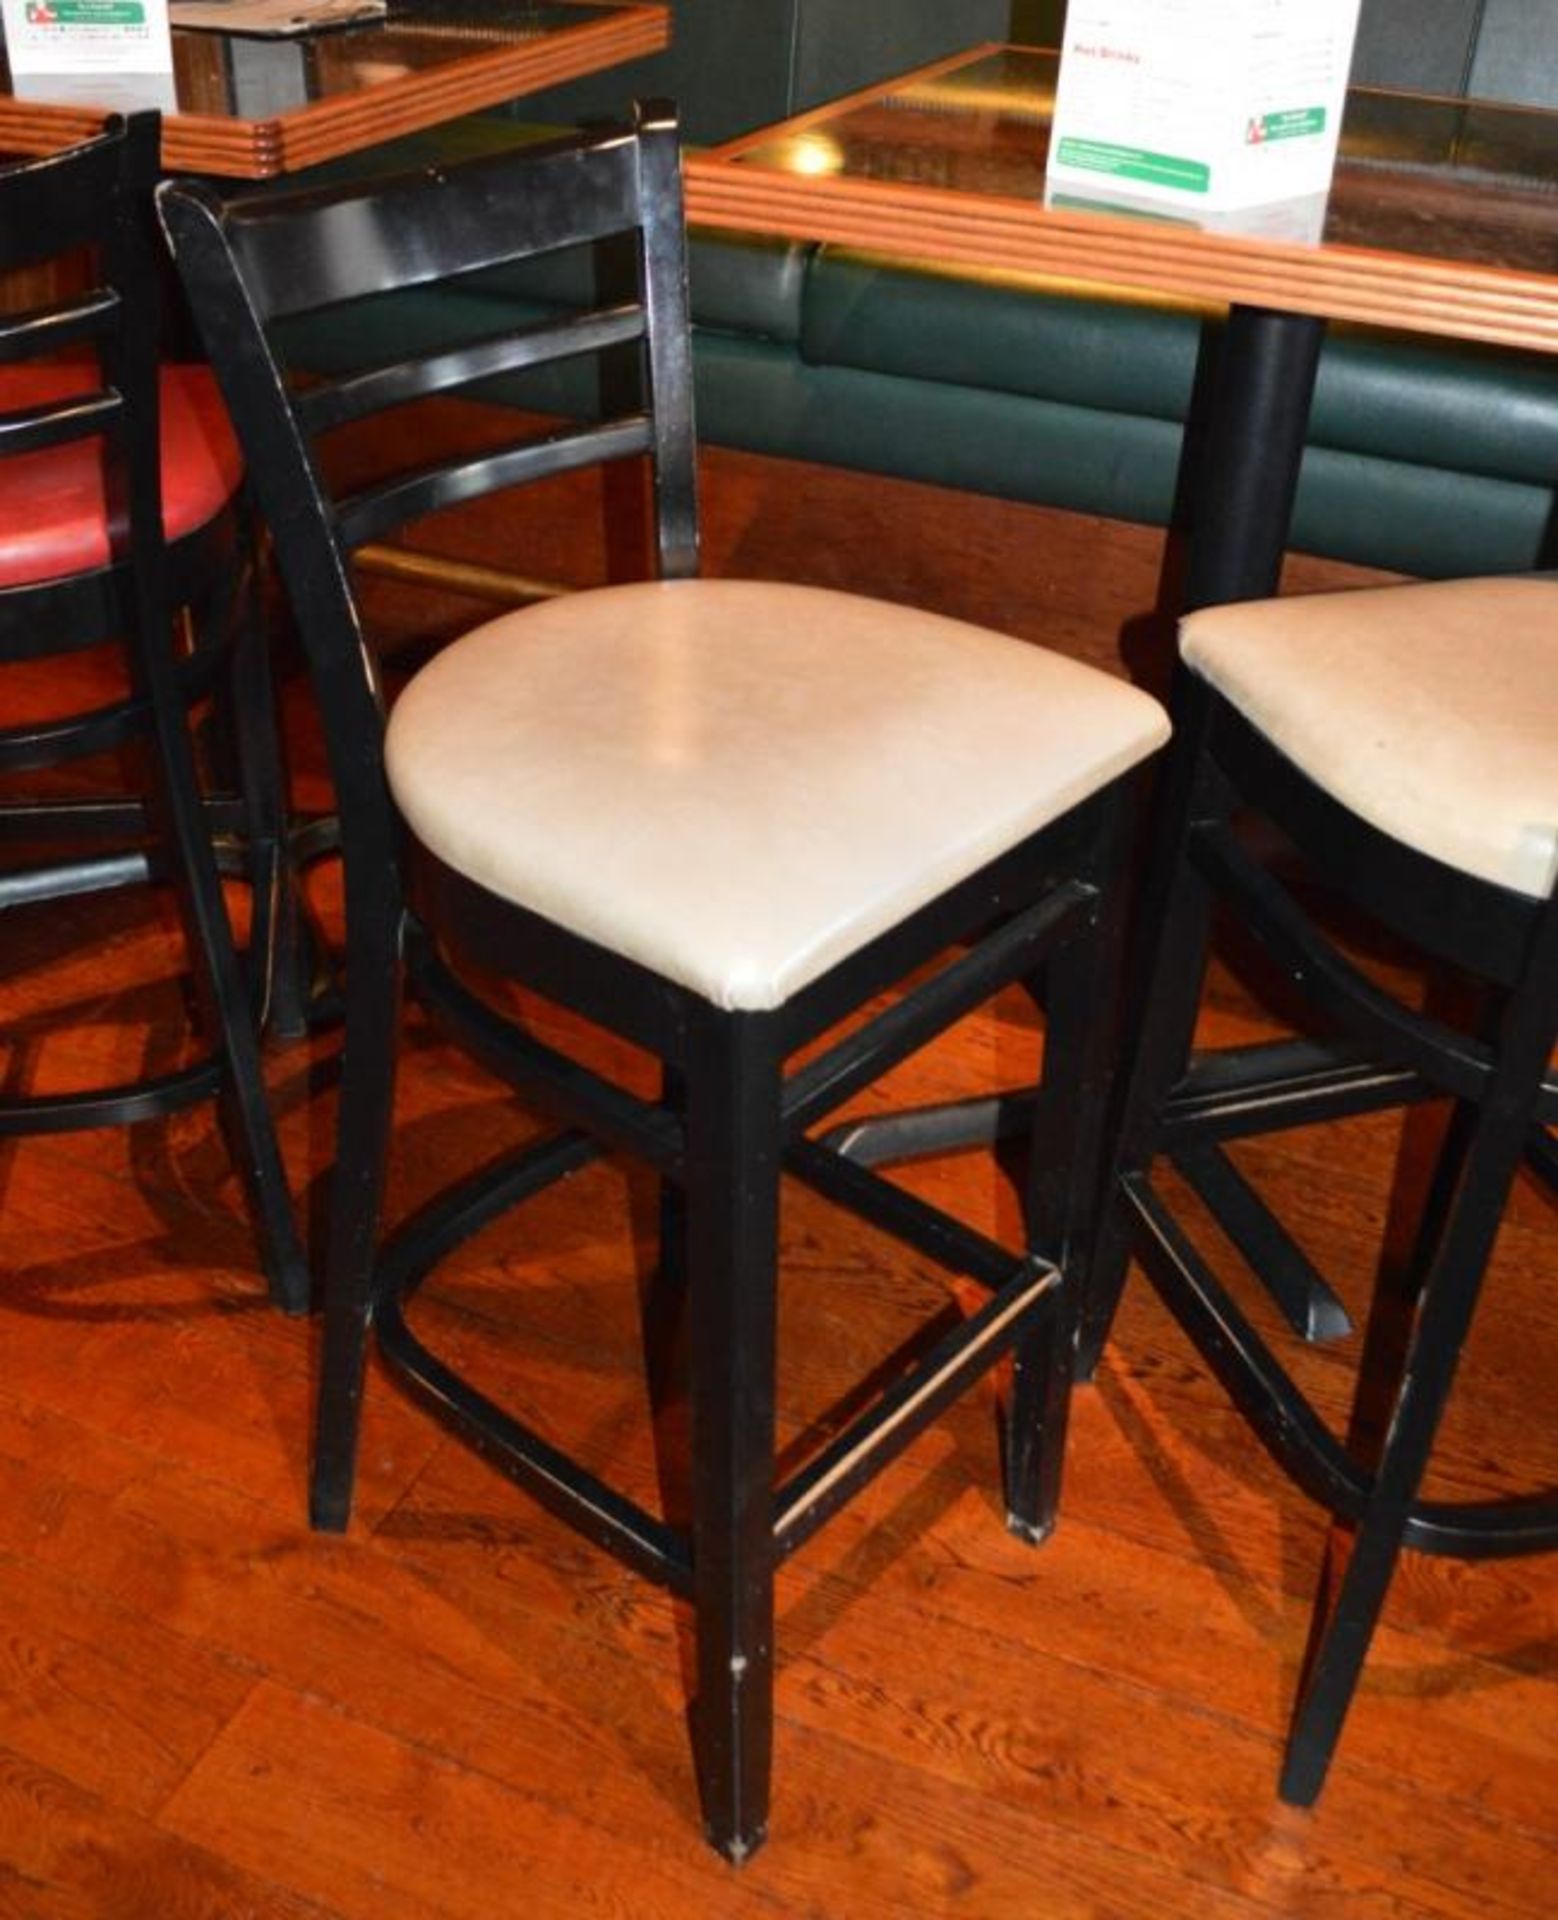 8 x Ladderback Bar Stools in Black and Cream and Red Faux Leather Seat Pads - CL357 - Location: Bolt - Image 9 of 9